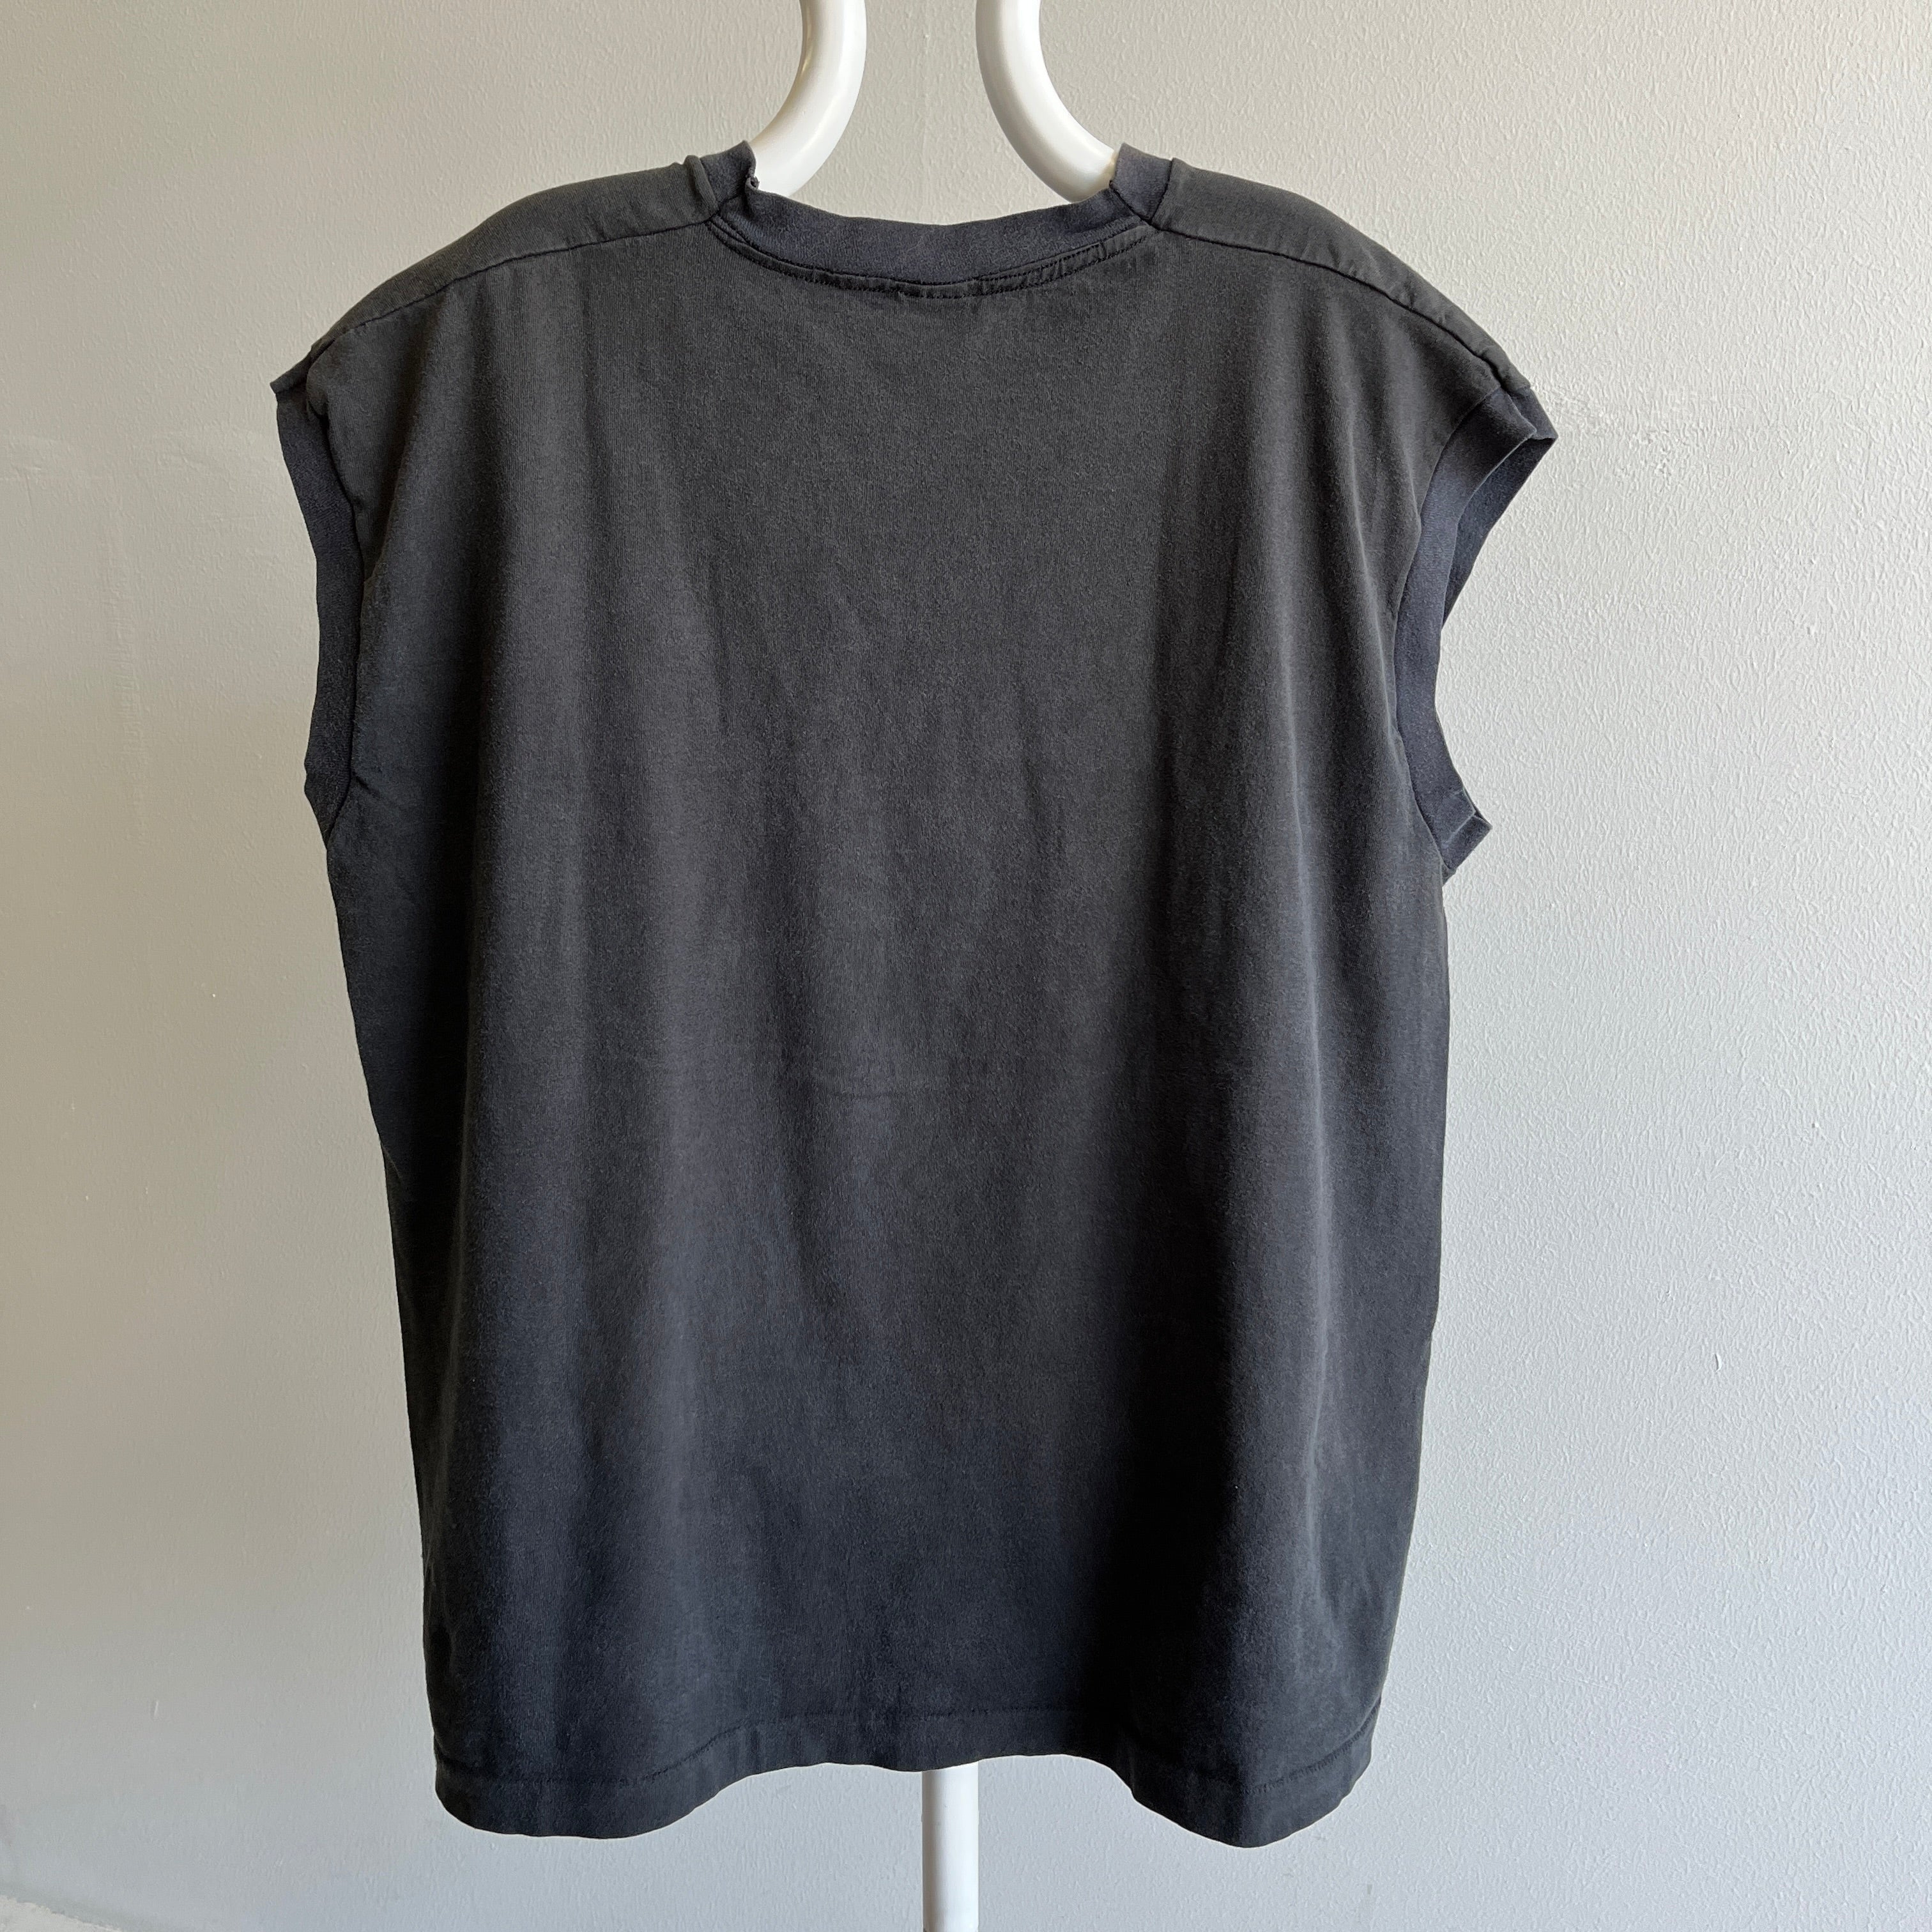 1980/90s Faded Blank Black Combed Cotton Muscle Tank